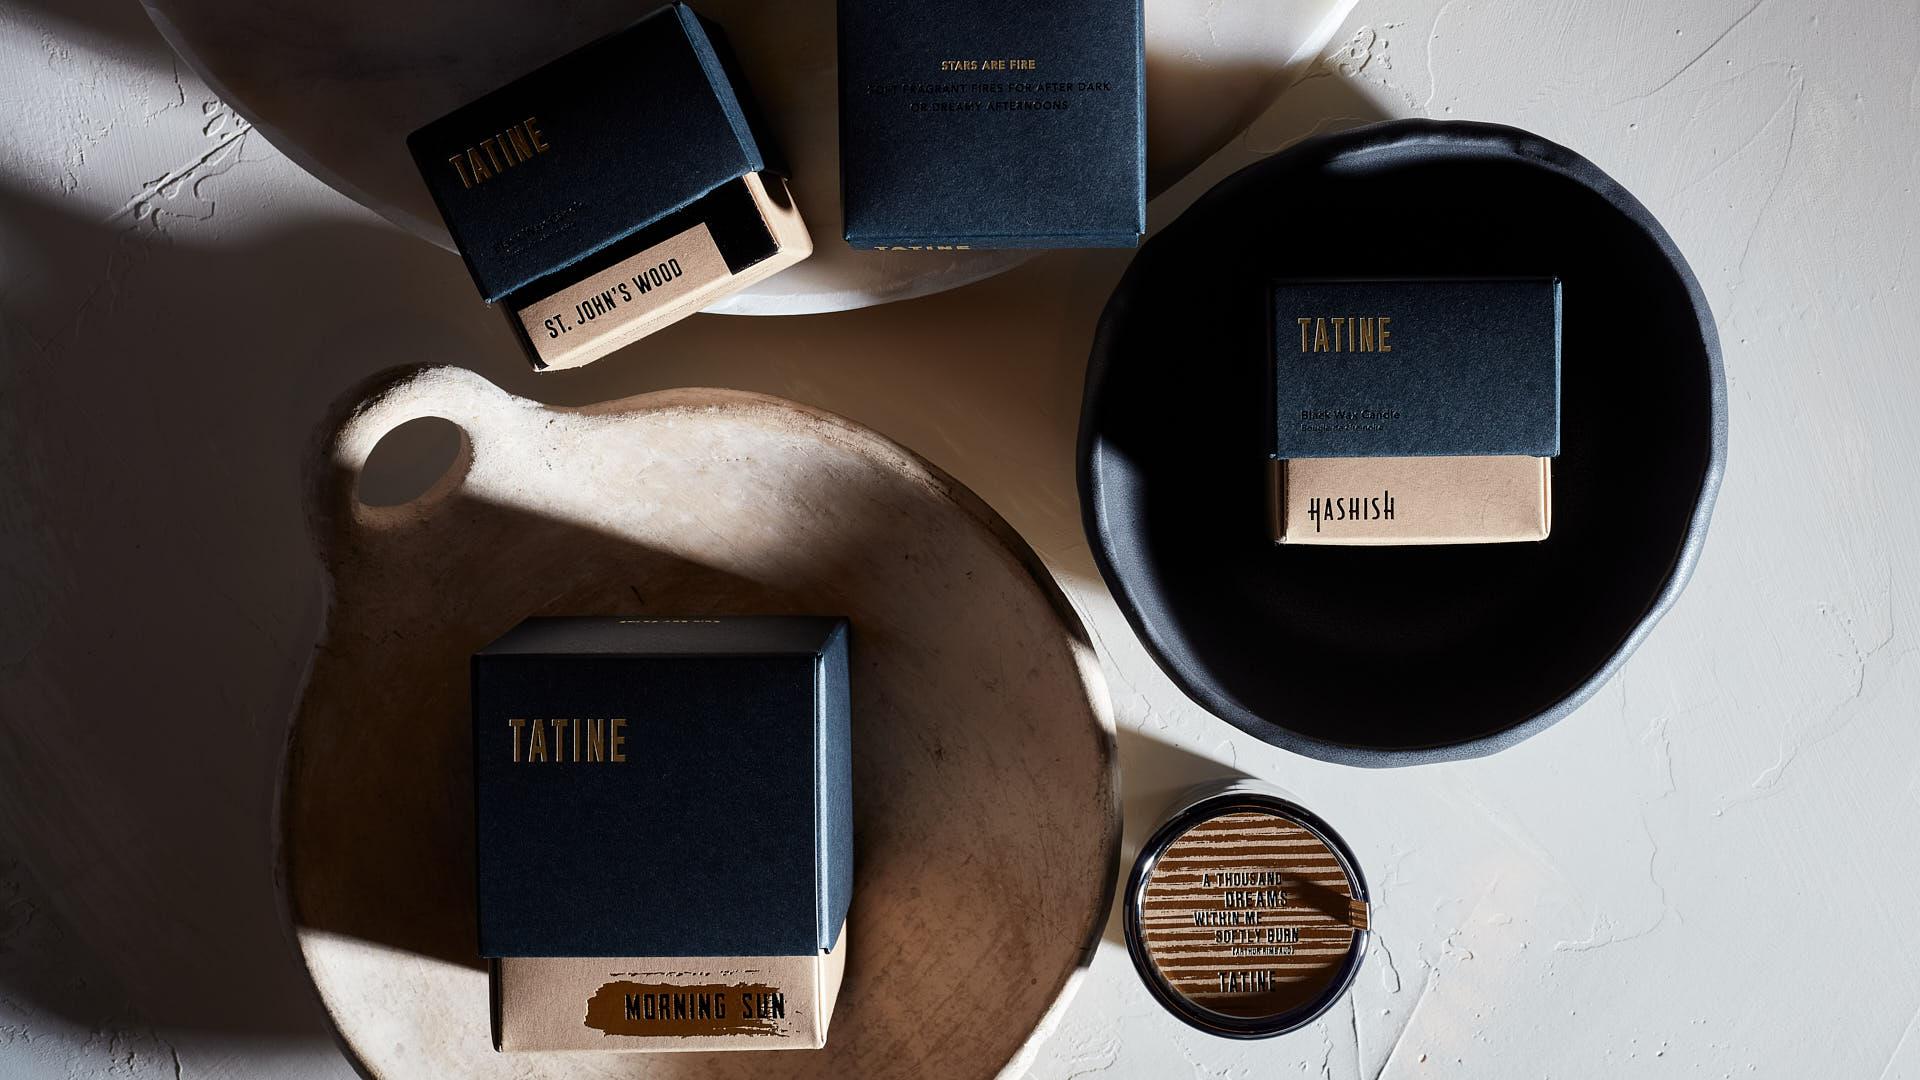 packaging-design-rebecca-snyder-alamode-designs-tatine-candles-stars-are-fire-collection